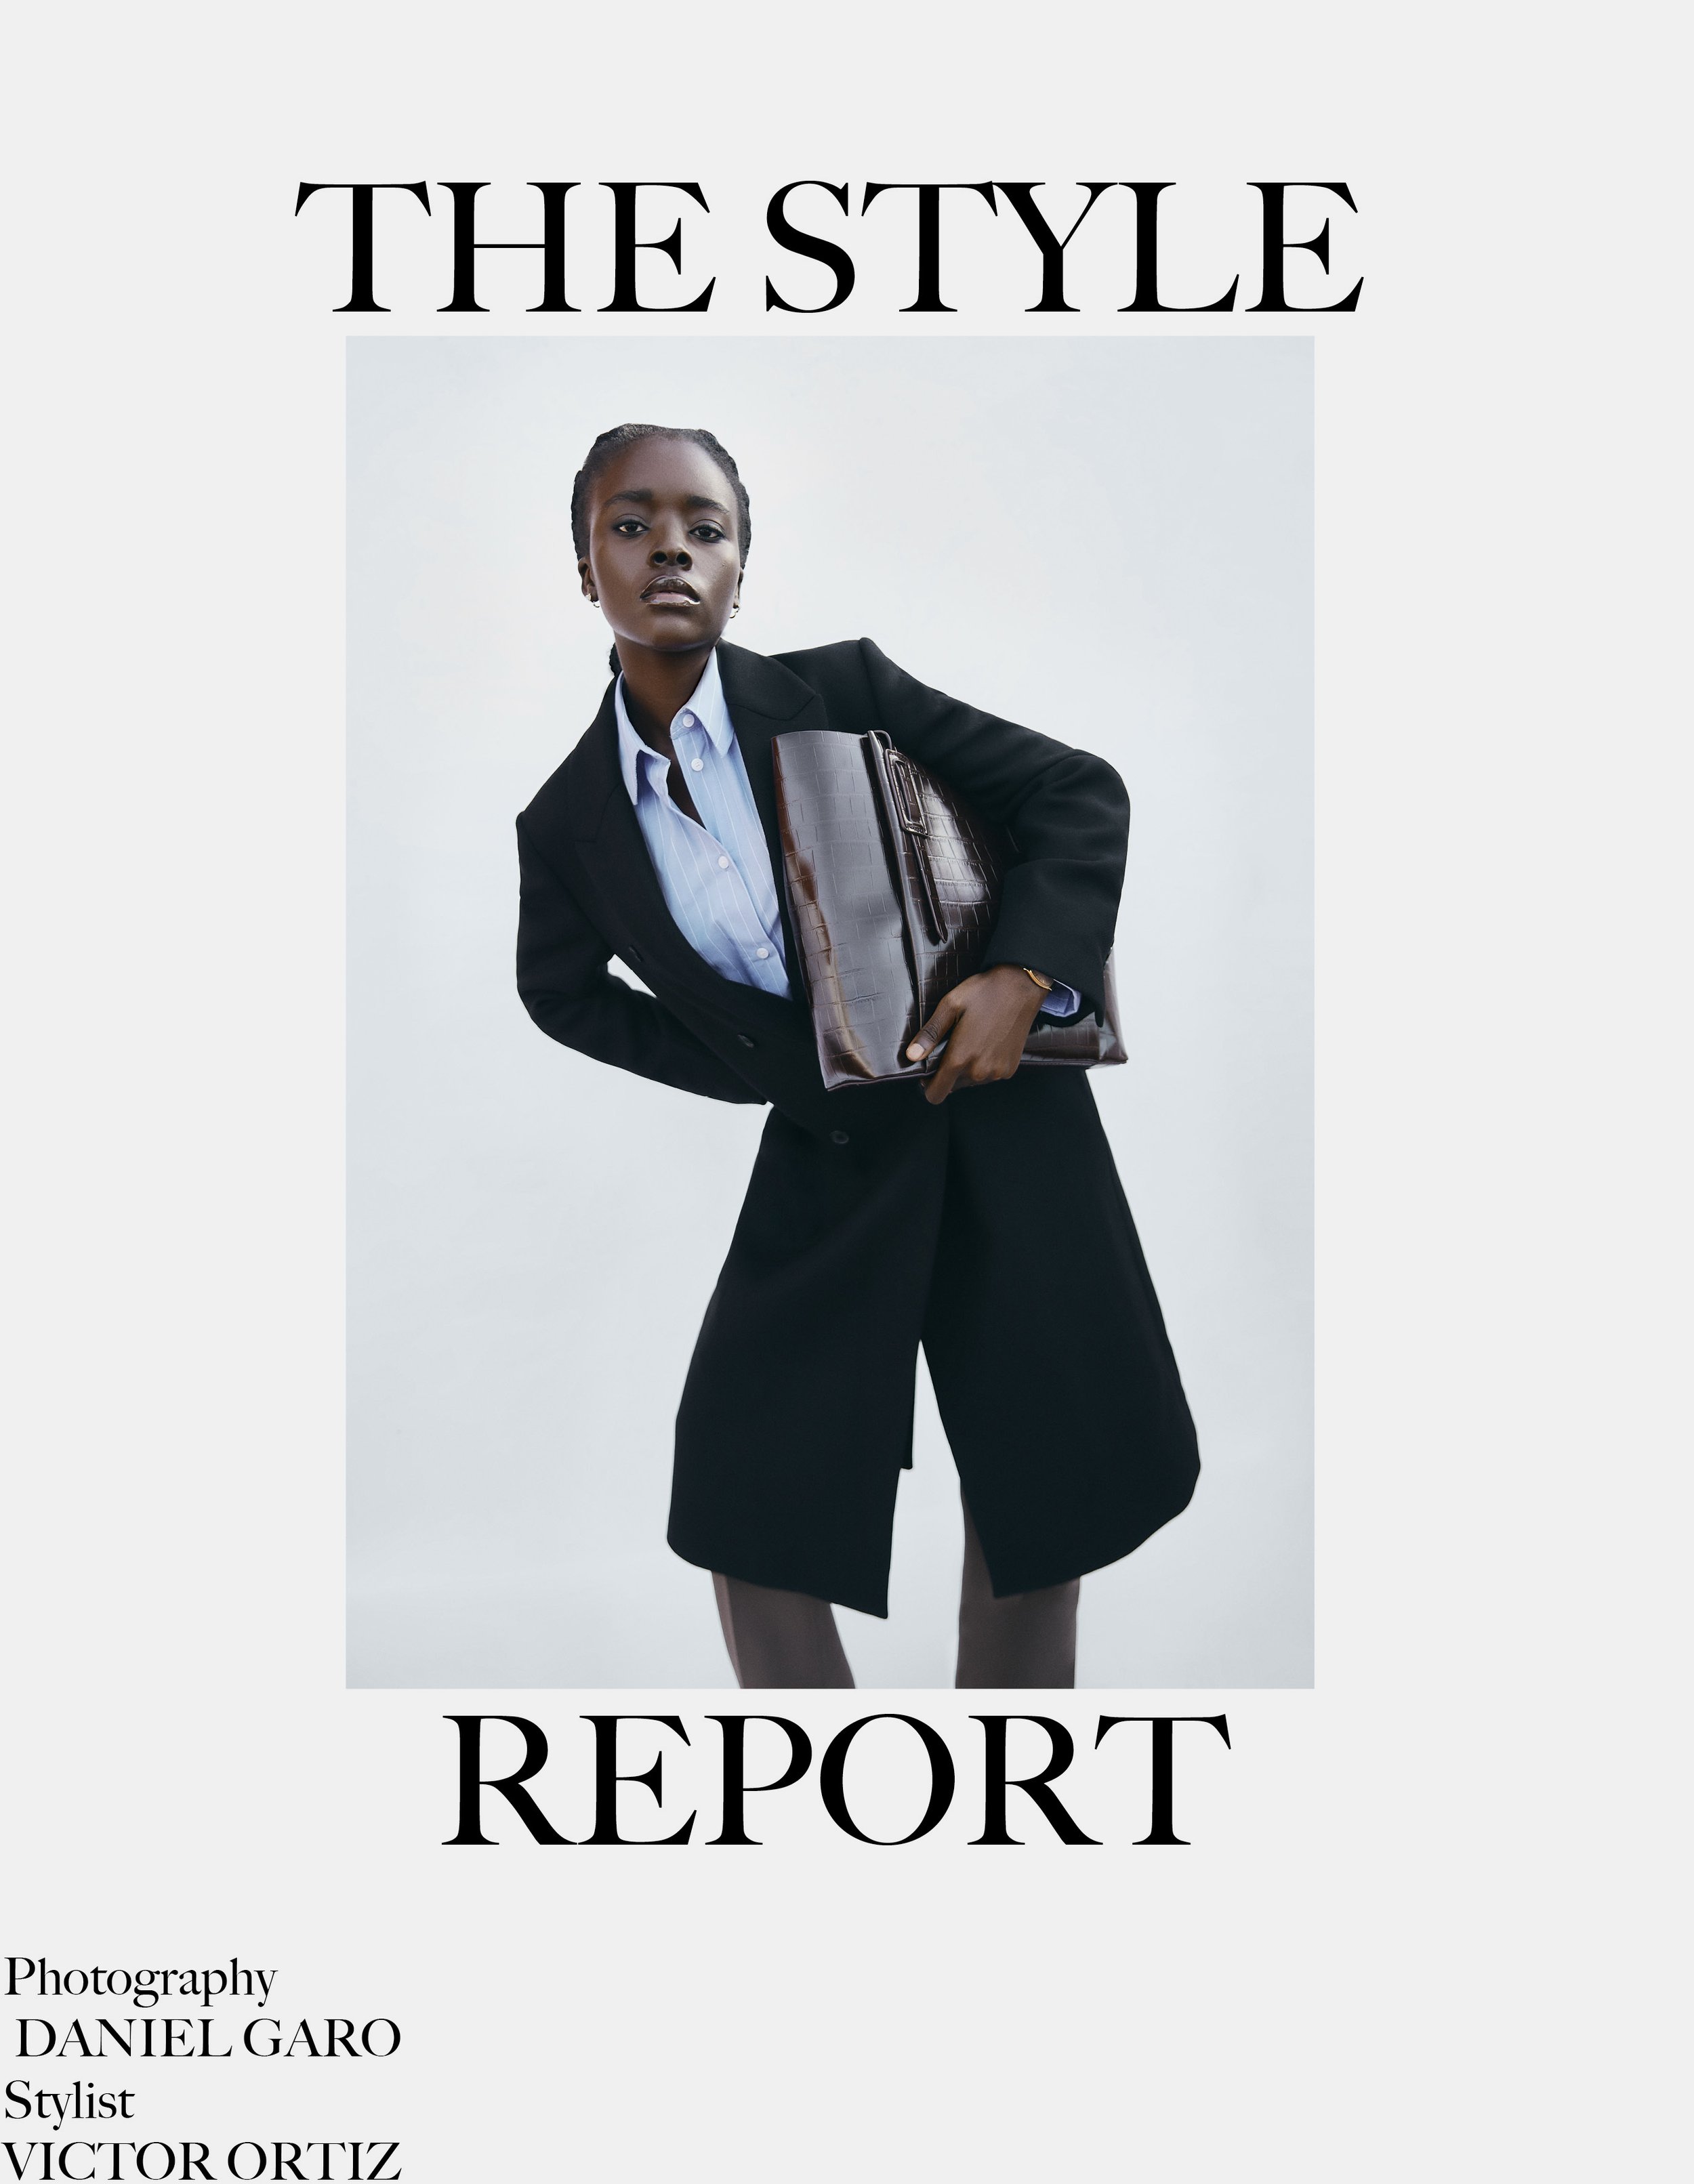 The style report2.jpg